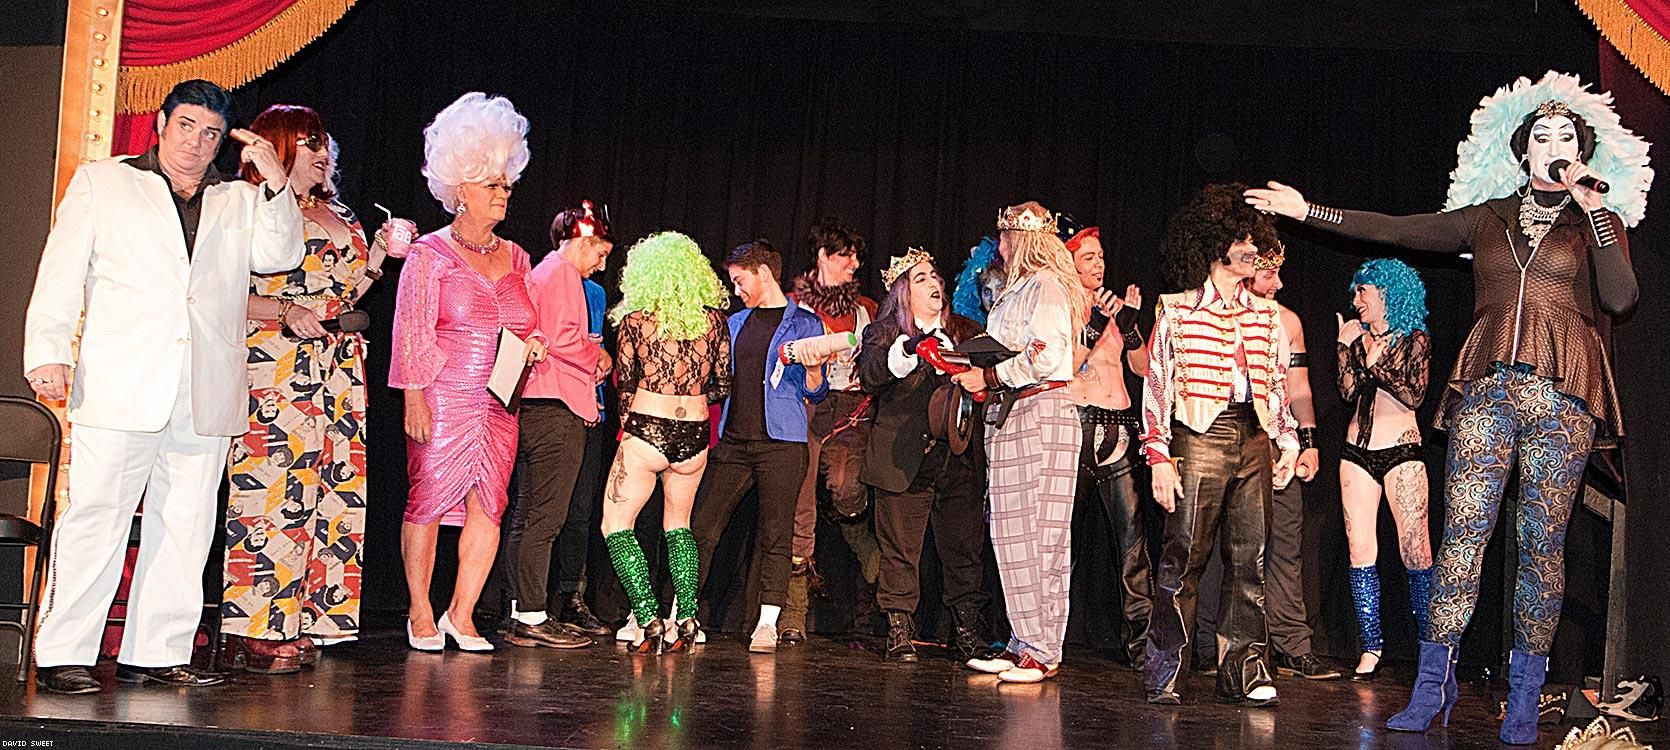 MC's Sister Roma and Fudgie Frottage with the Judges, Leigh Crow, Super Fishal, Mutha Chucka, and the winners and contestants